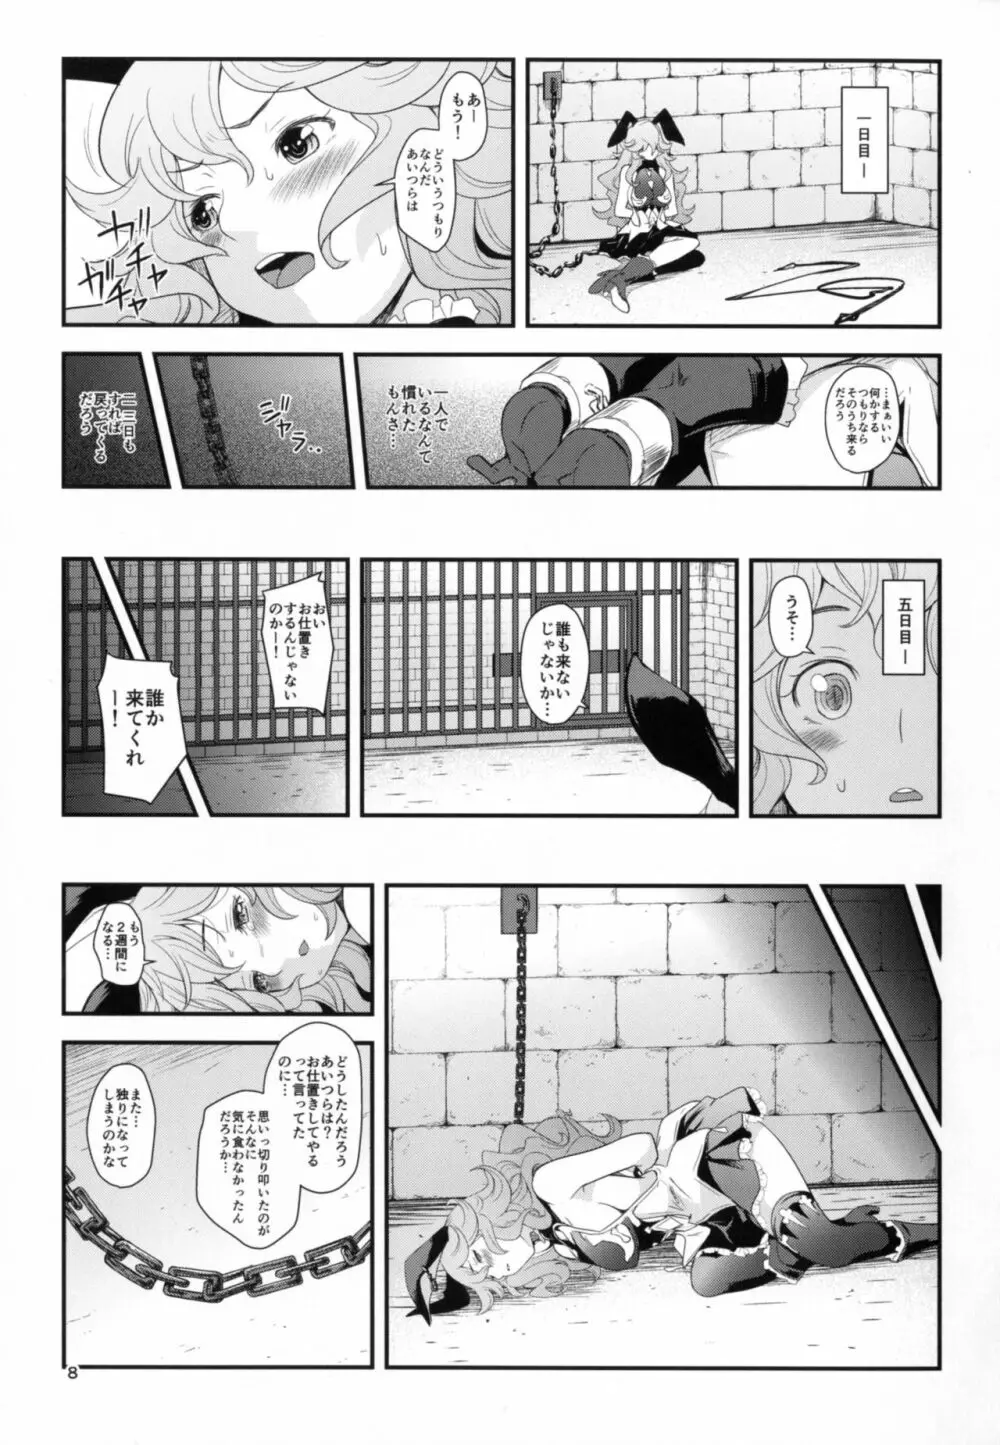 REVERSE -フェリの逆調教- - page8